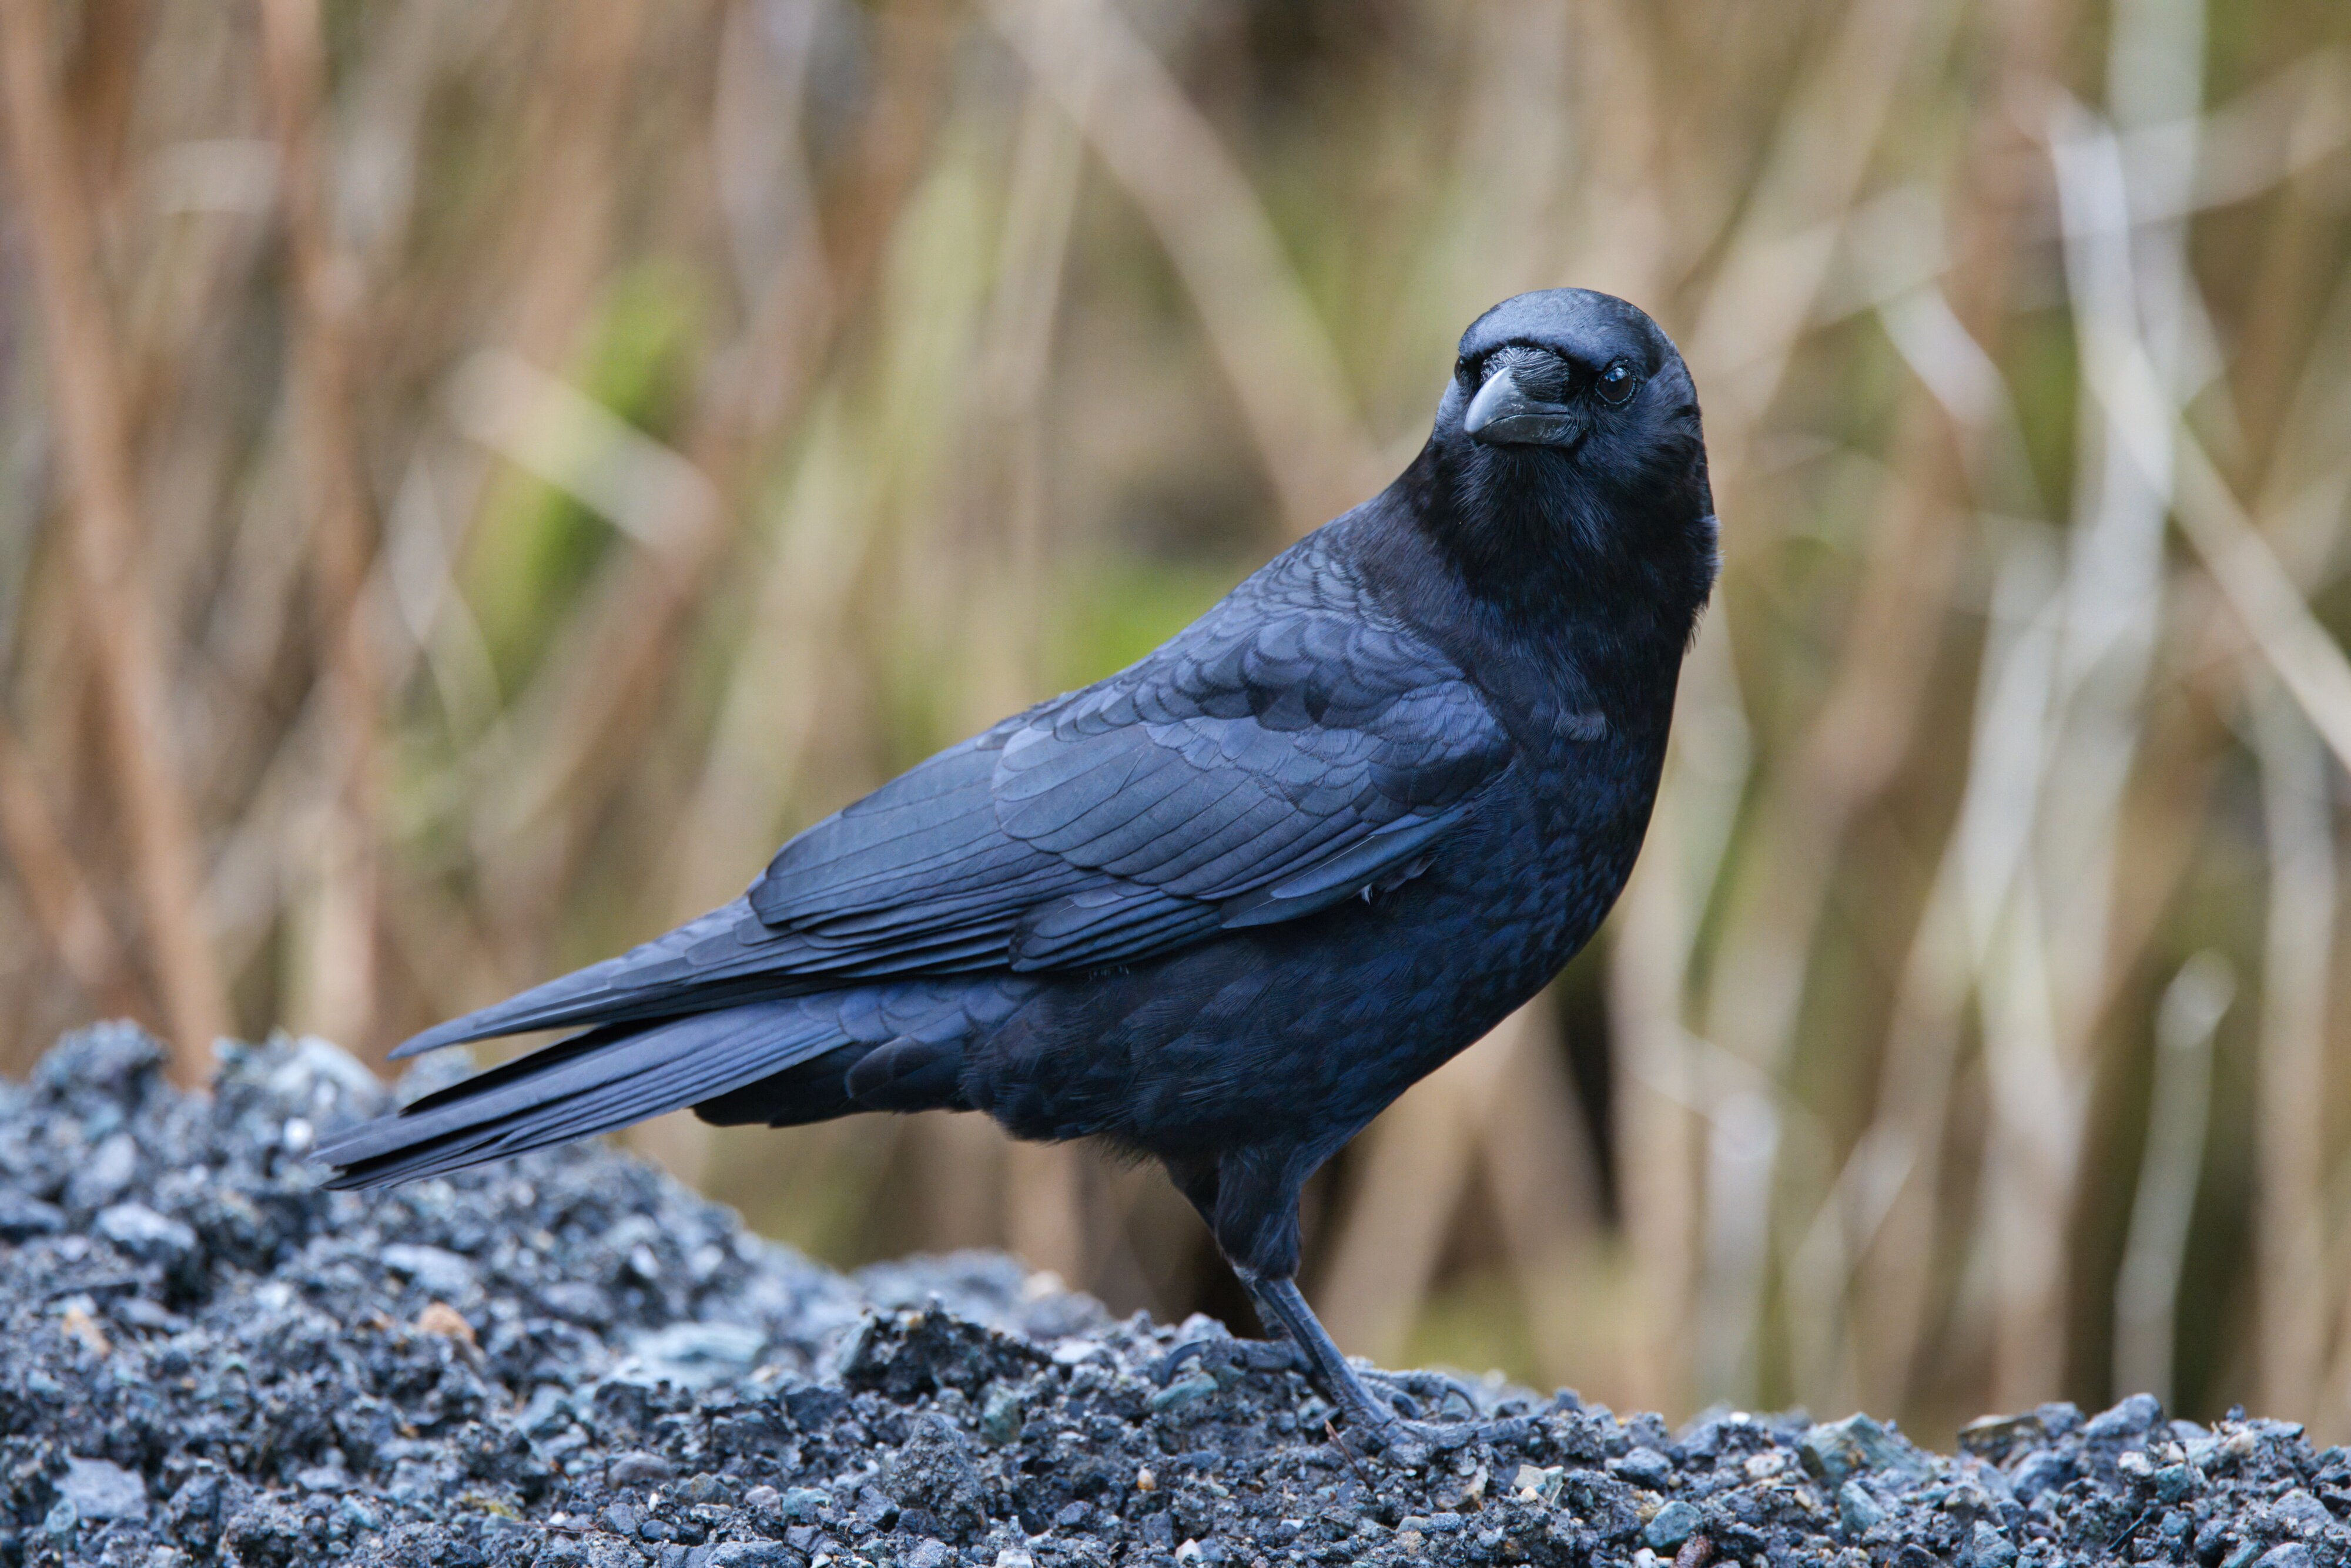 Even the common American Crow needs some love!